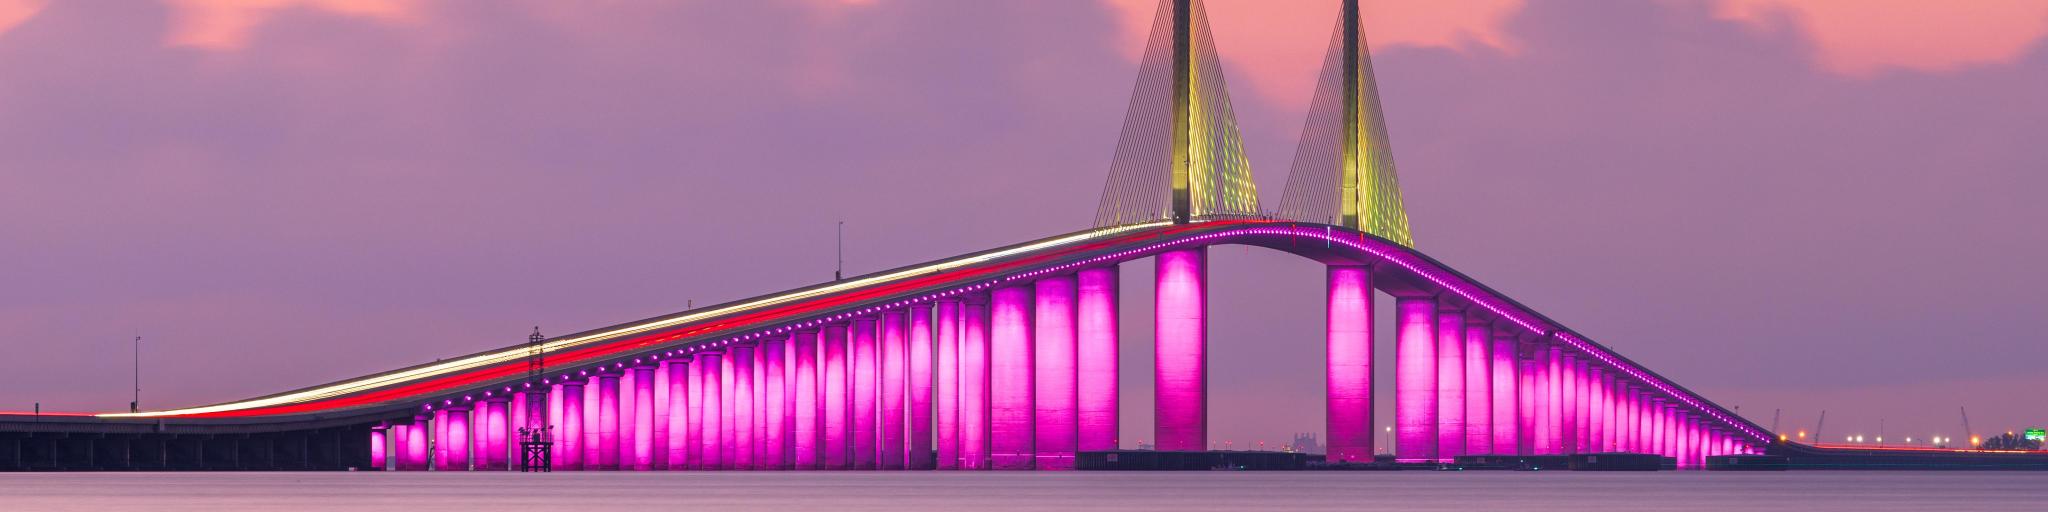 Sunshine Skyway Bridge, St. Petersburg spanning the Lower Tampa Bay at sunset and lit up in a bright pink.